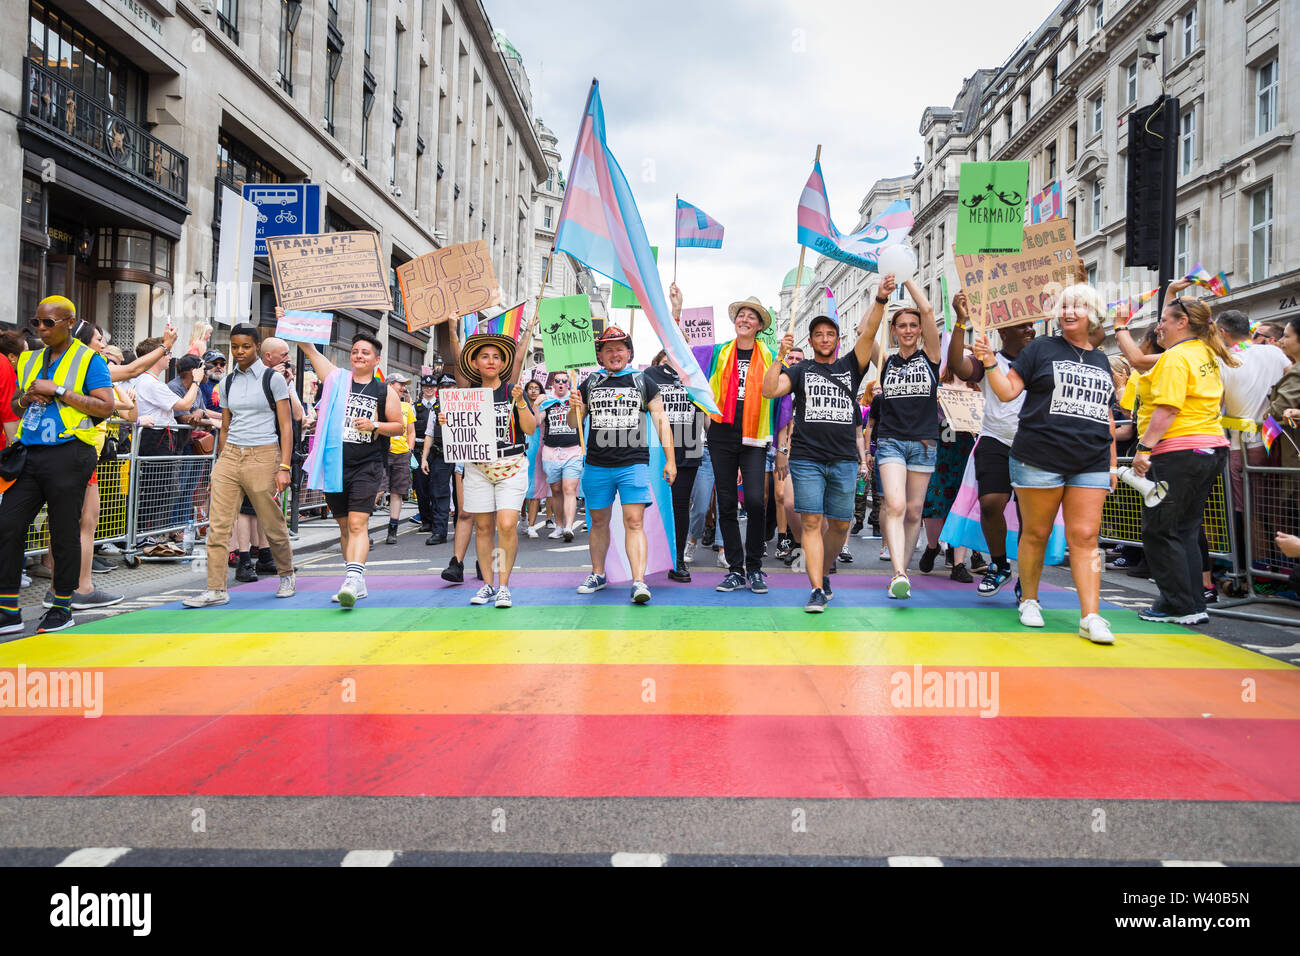 Marching group of Trans activists on the rainbow crossing at Pride Stock Photo